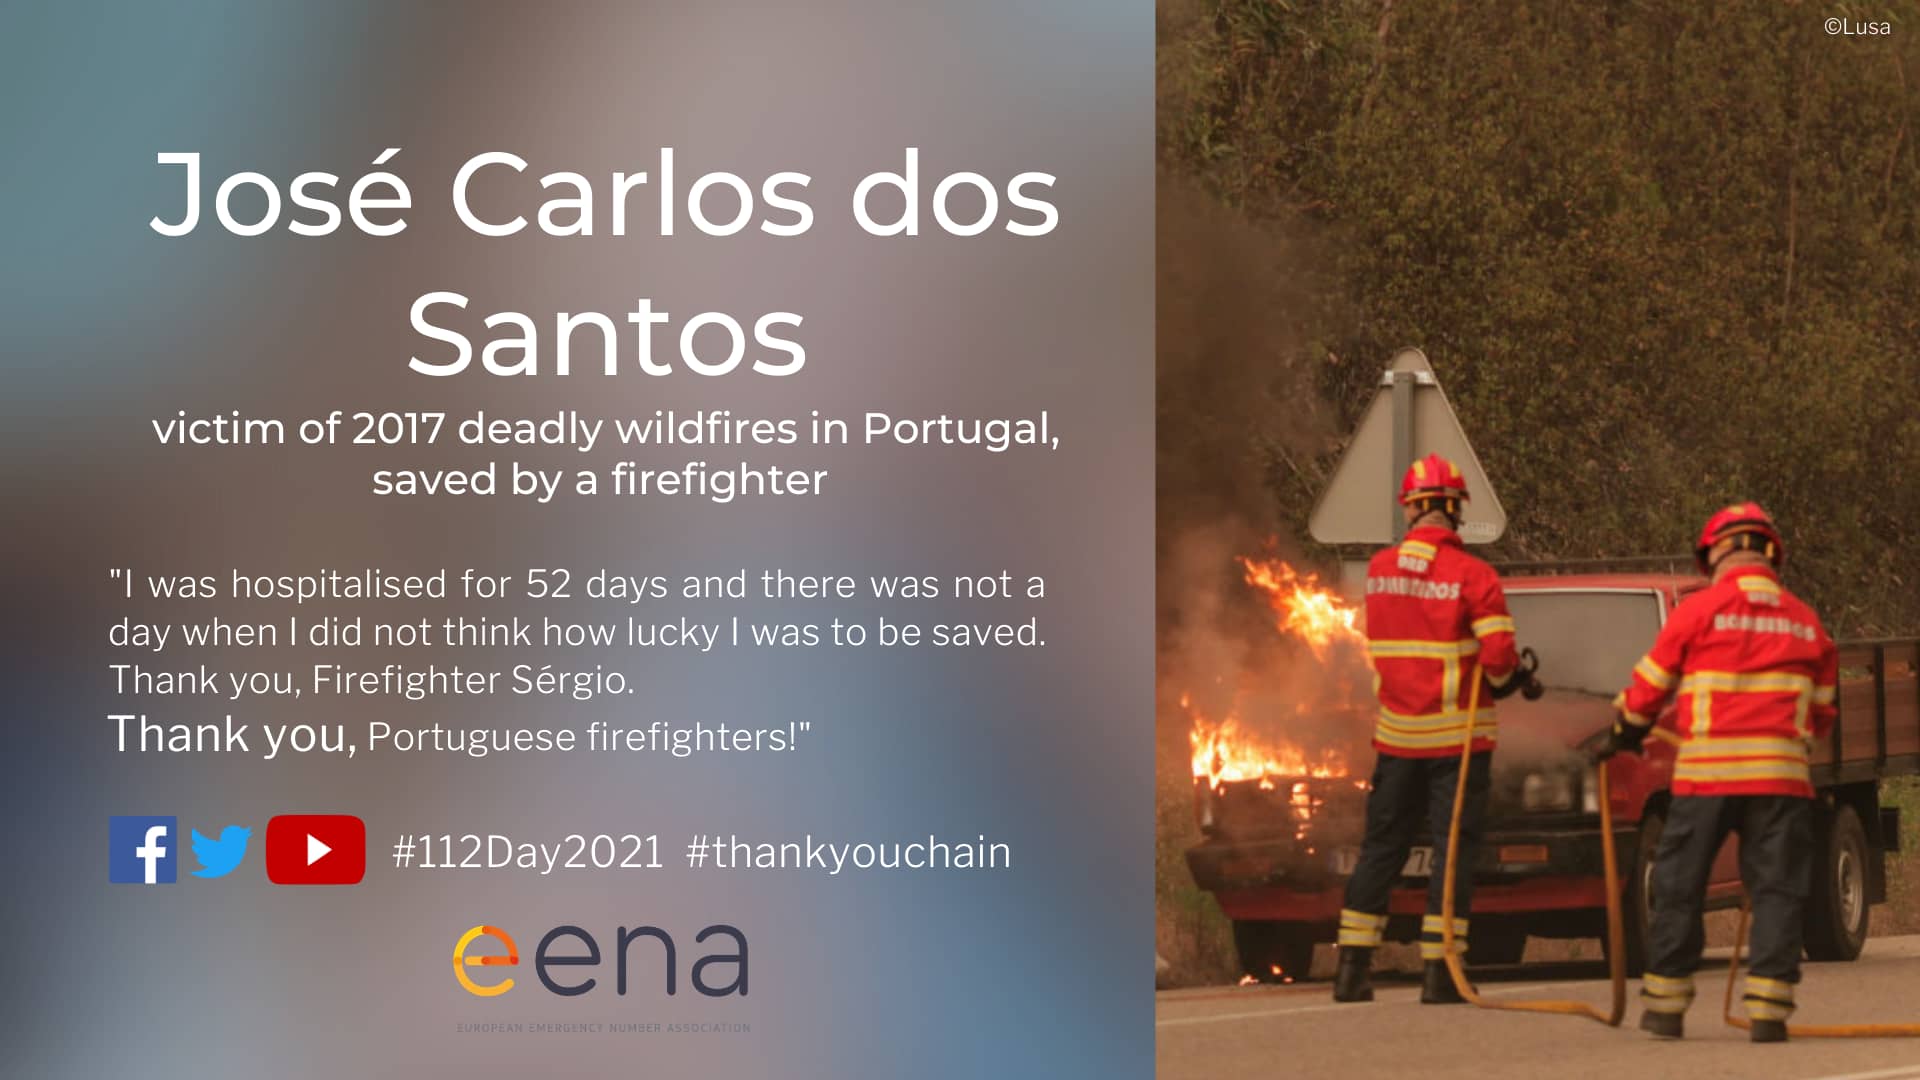 José Carlos dos Santos thanks the firefighter who saved his life